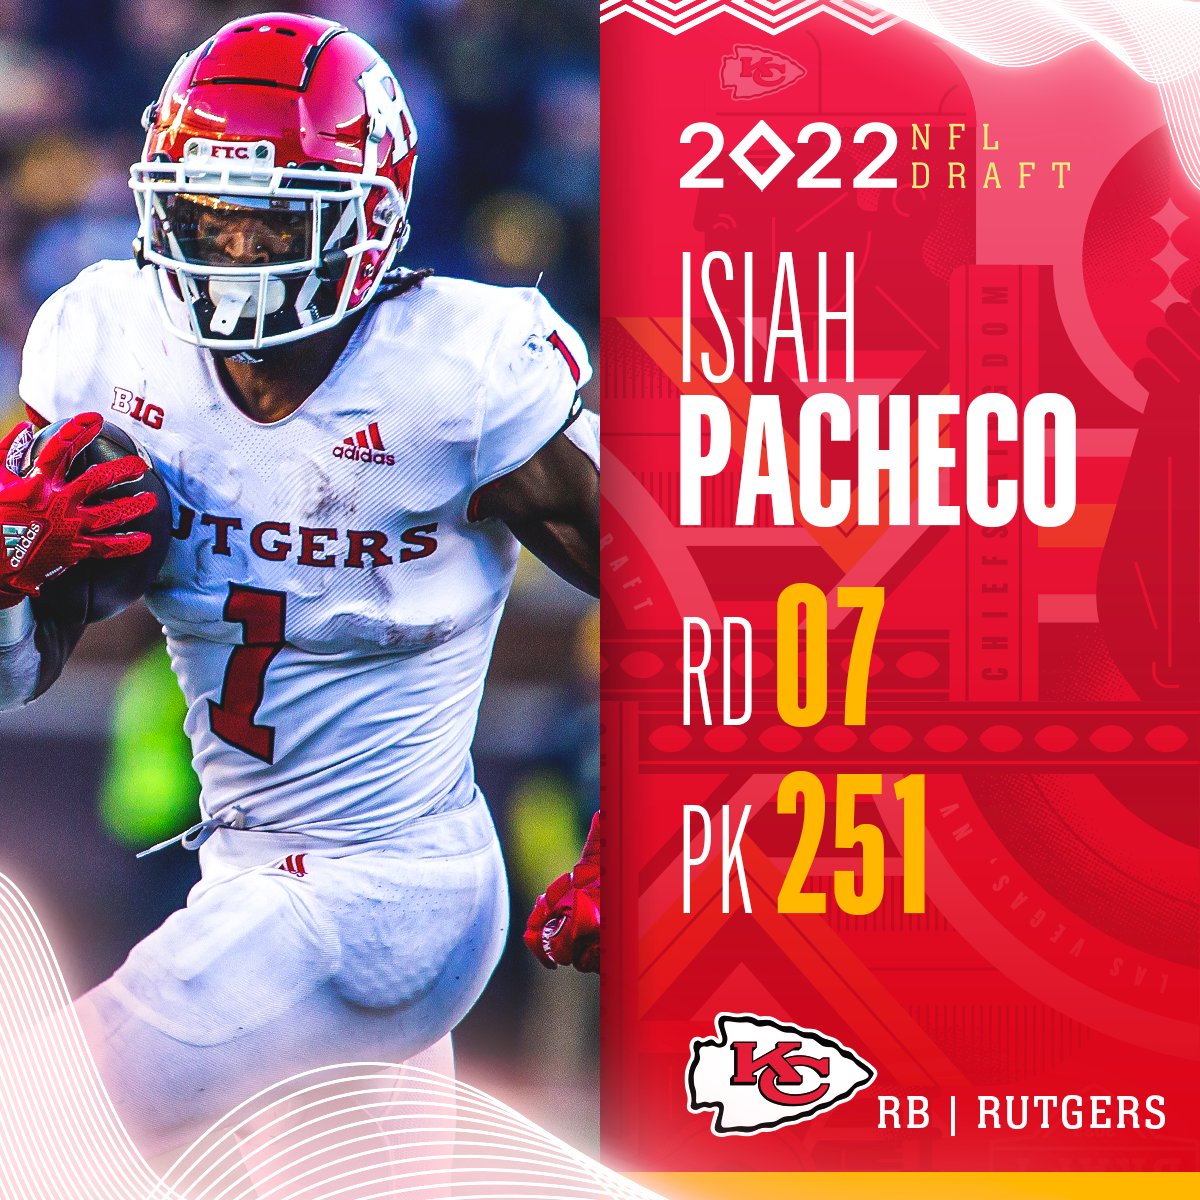 With the No. 251 overall pick in the 2022 @NFLDraft, the @Chiefs select Isiah Pacheco! 📺: 2022 #NFLDraft on NFLN/ESPN/ABC